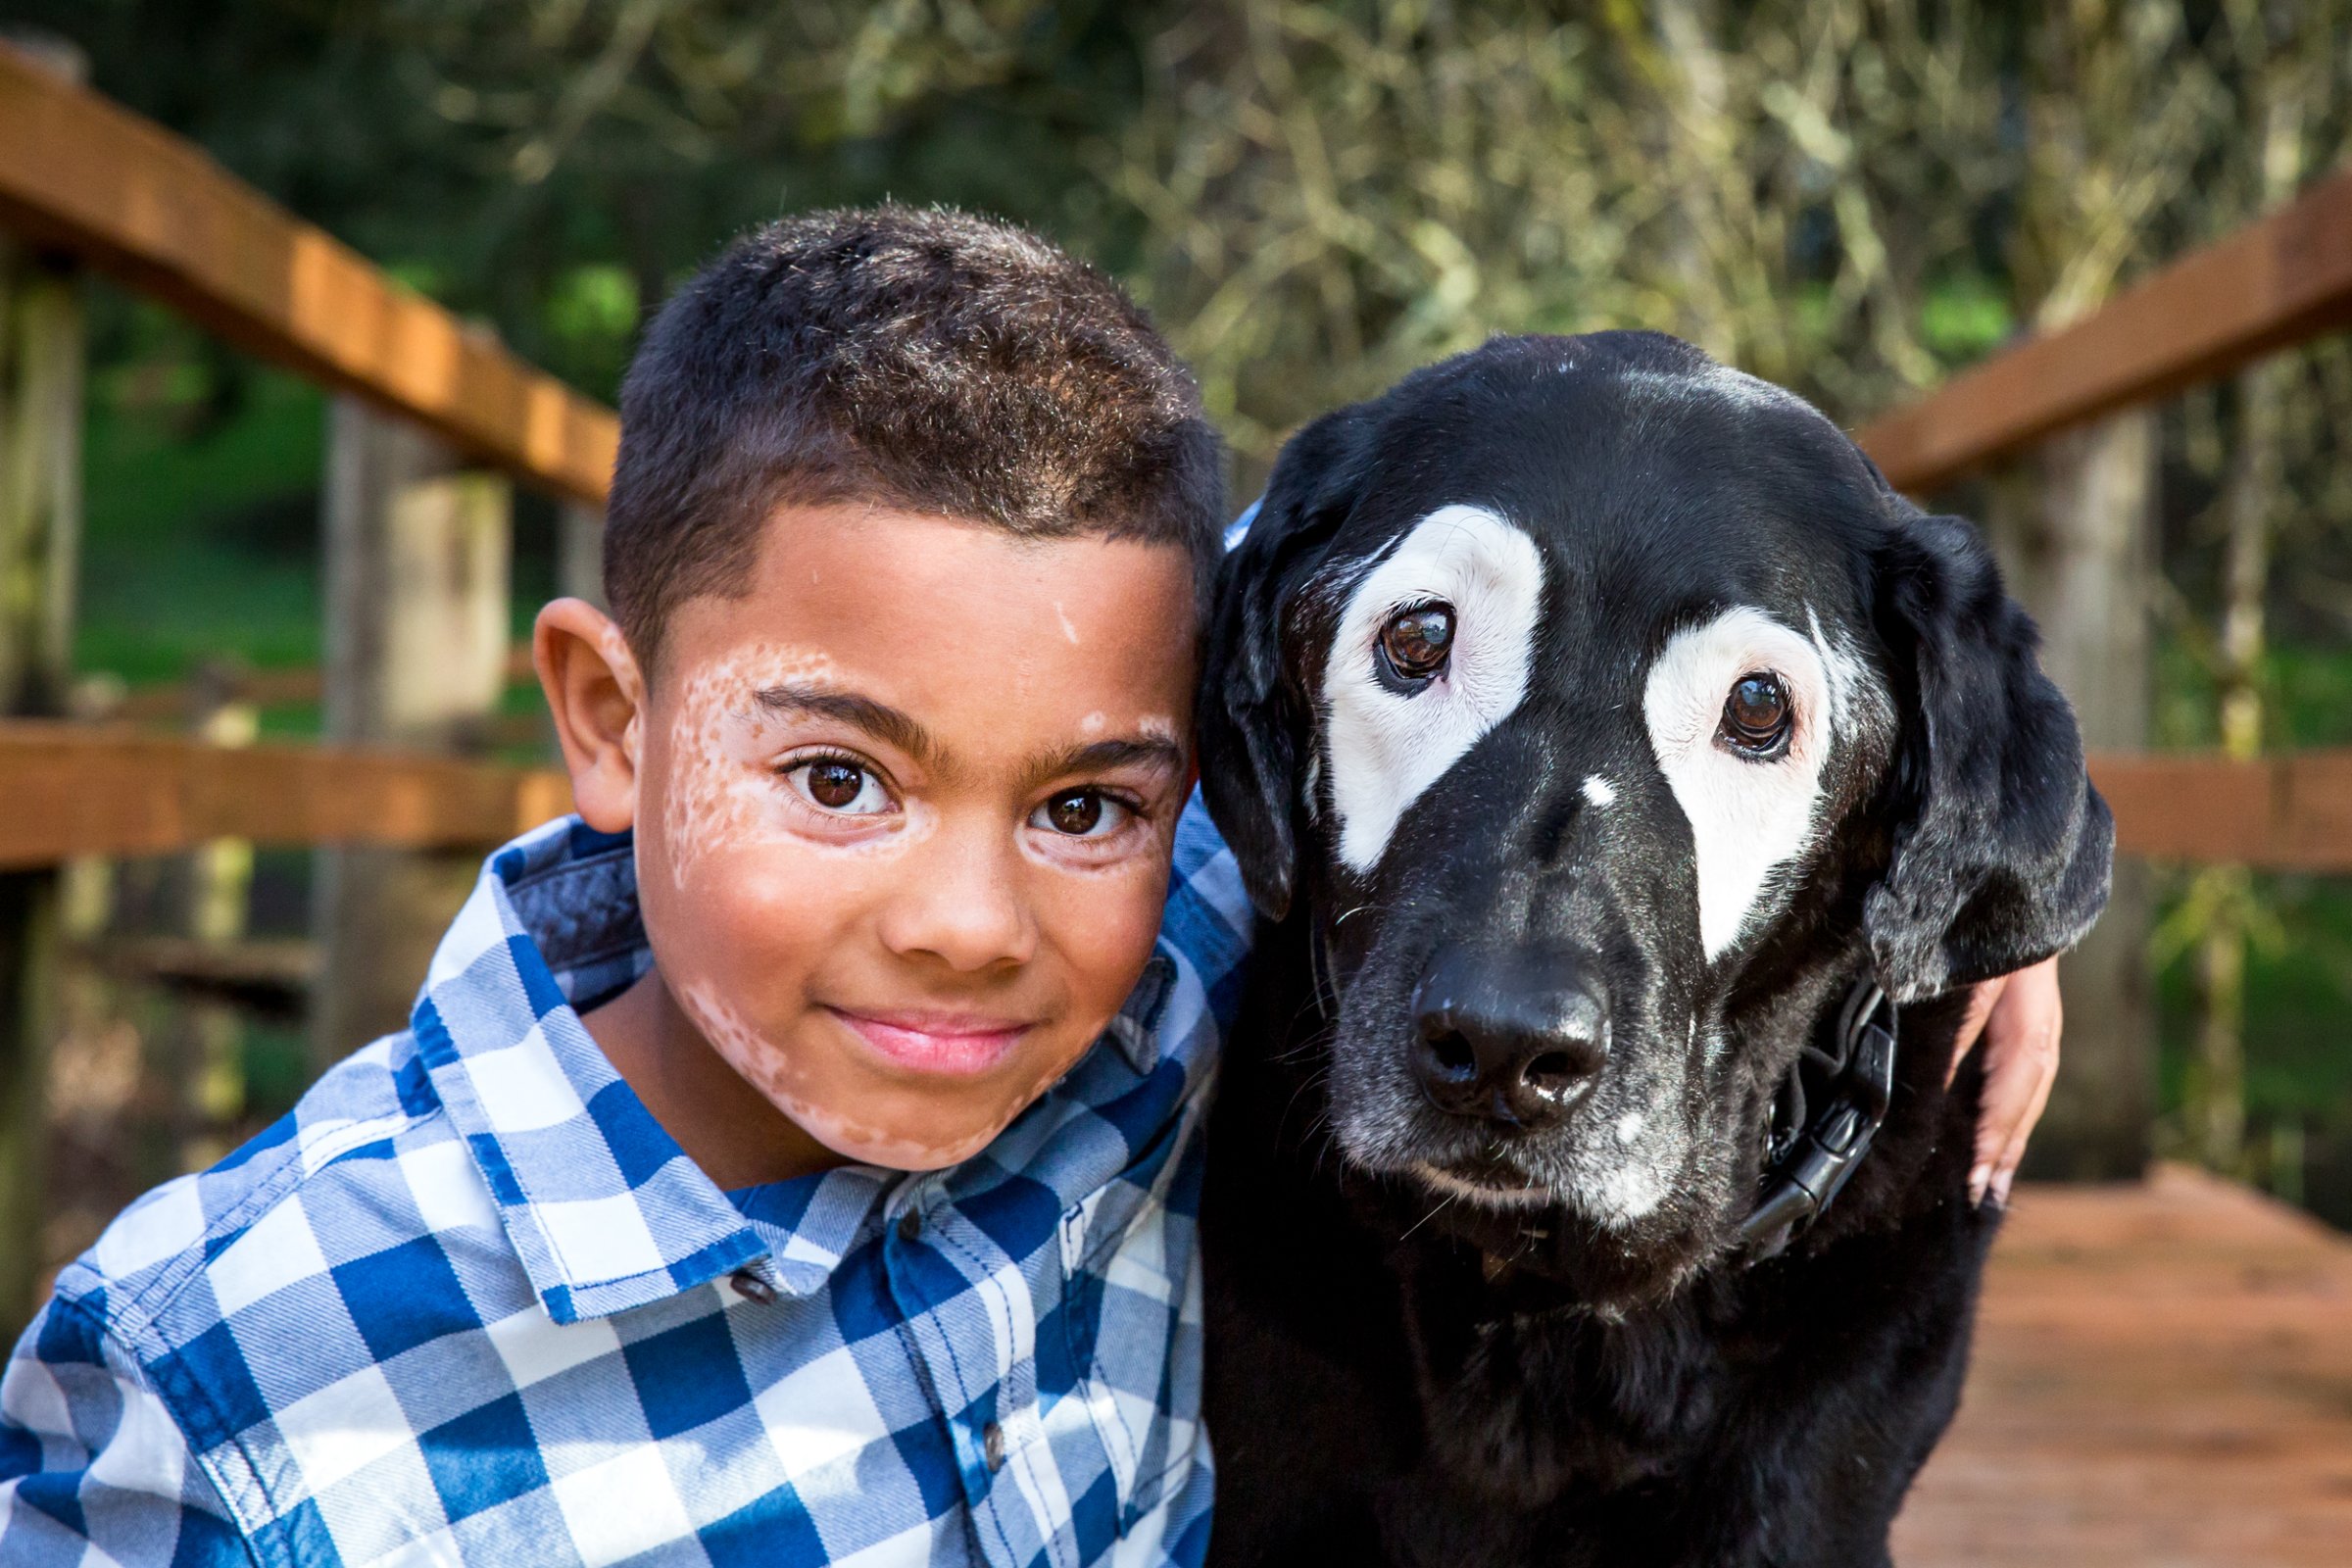 Carter Blanchard, of Arkansas, is pictured here with his new friend Rowdy. Both were diagnosed with Vitiligo, a rare skin disorder.